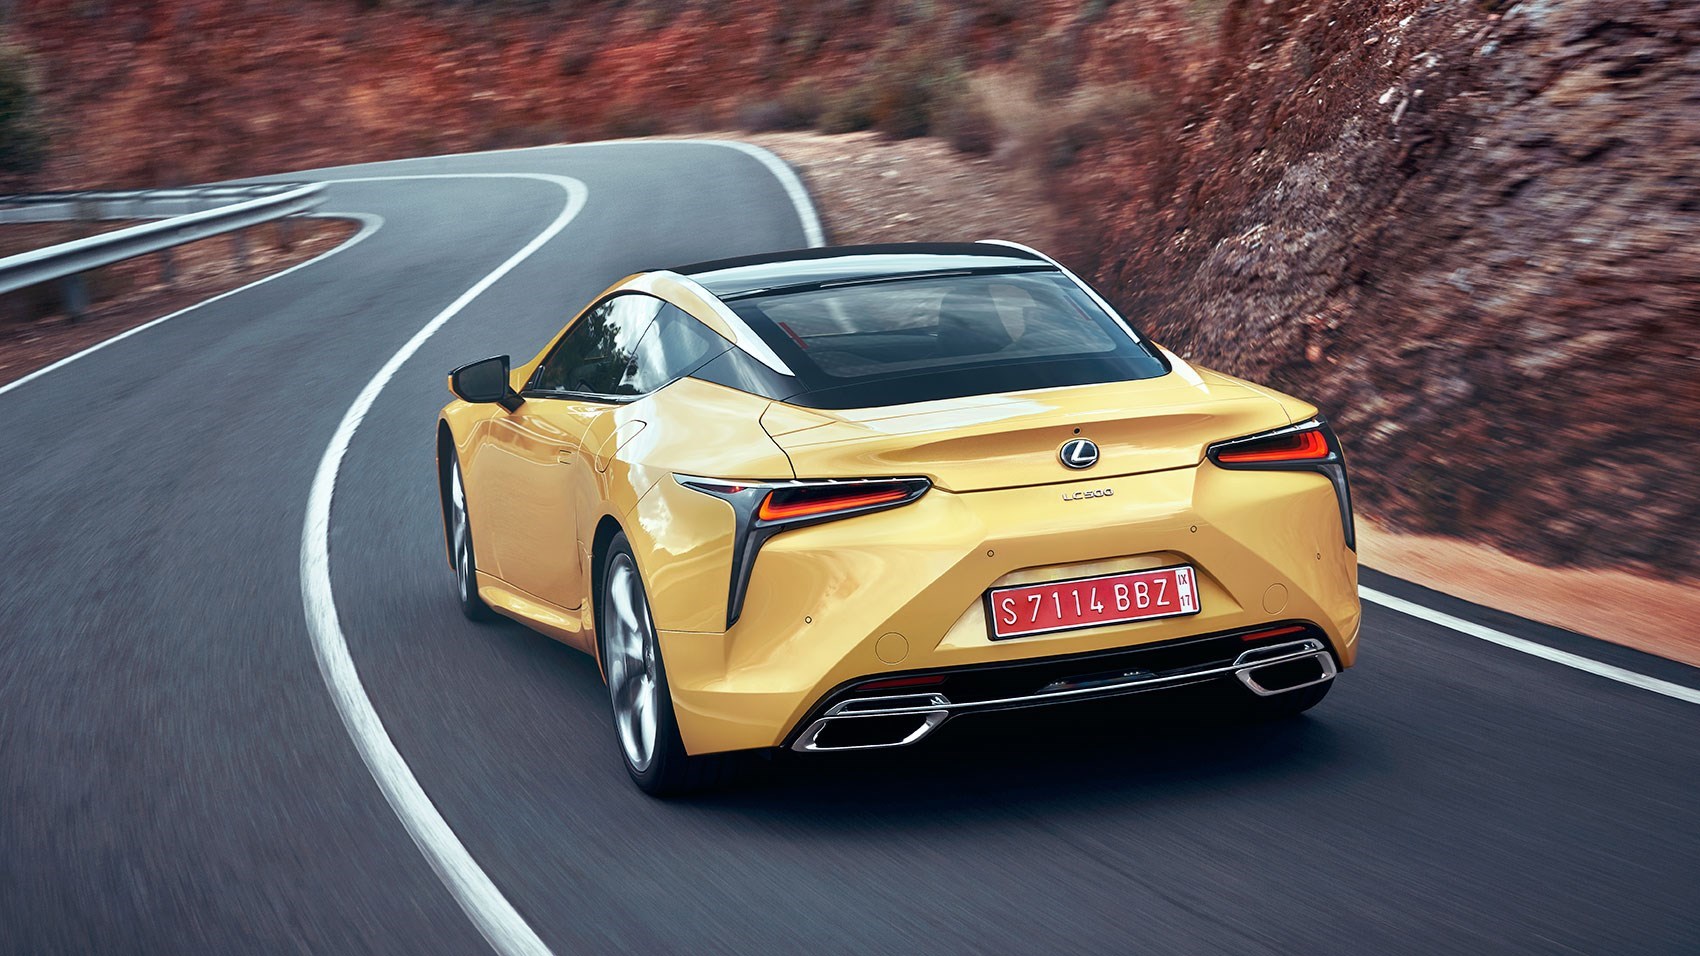 Lexus LC price: from £74,000 in the UK